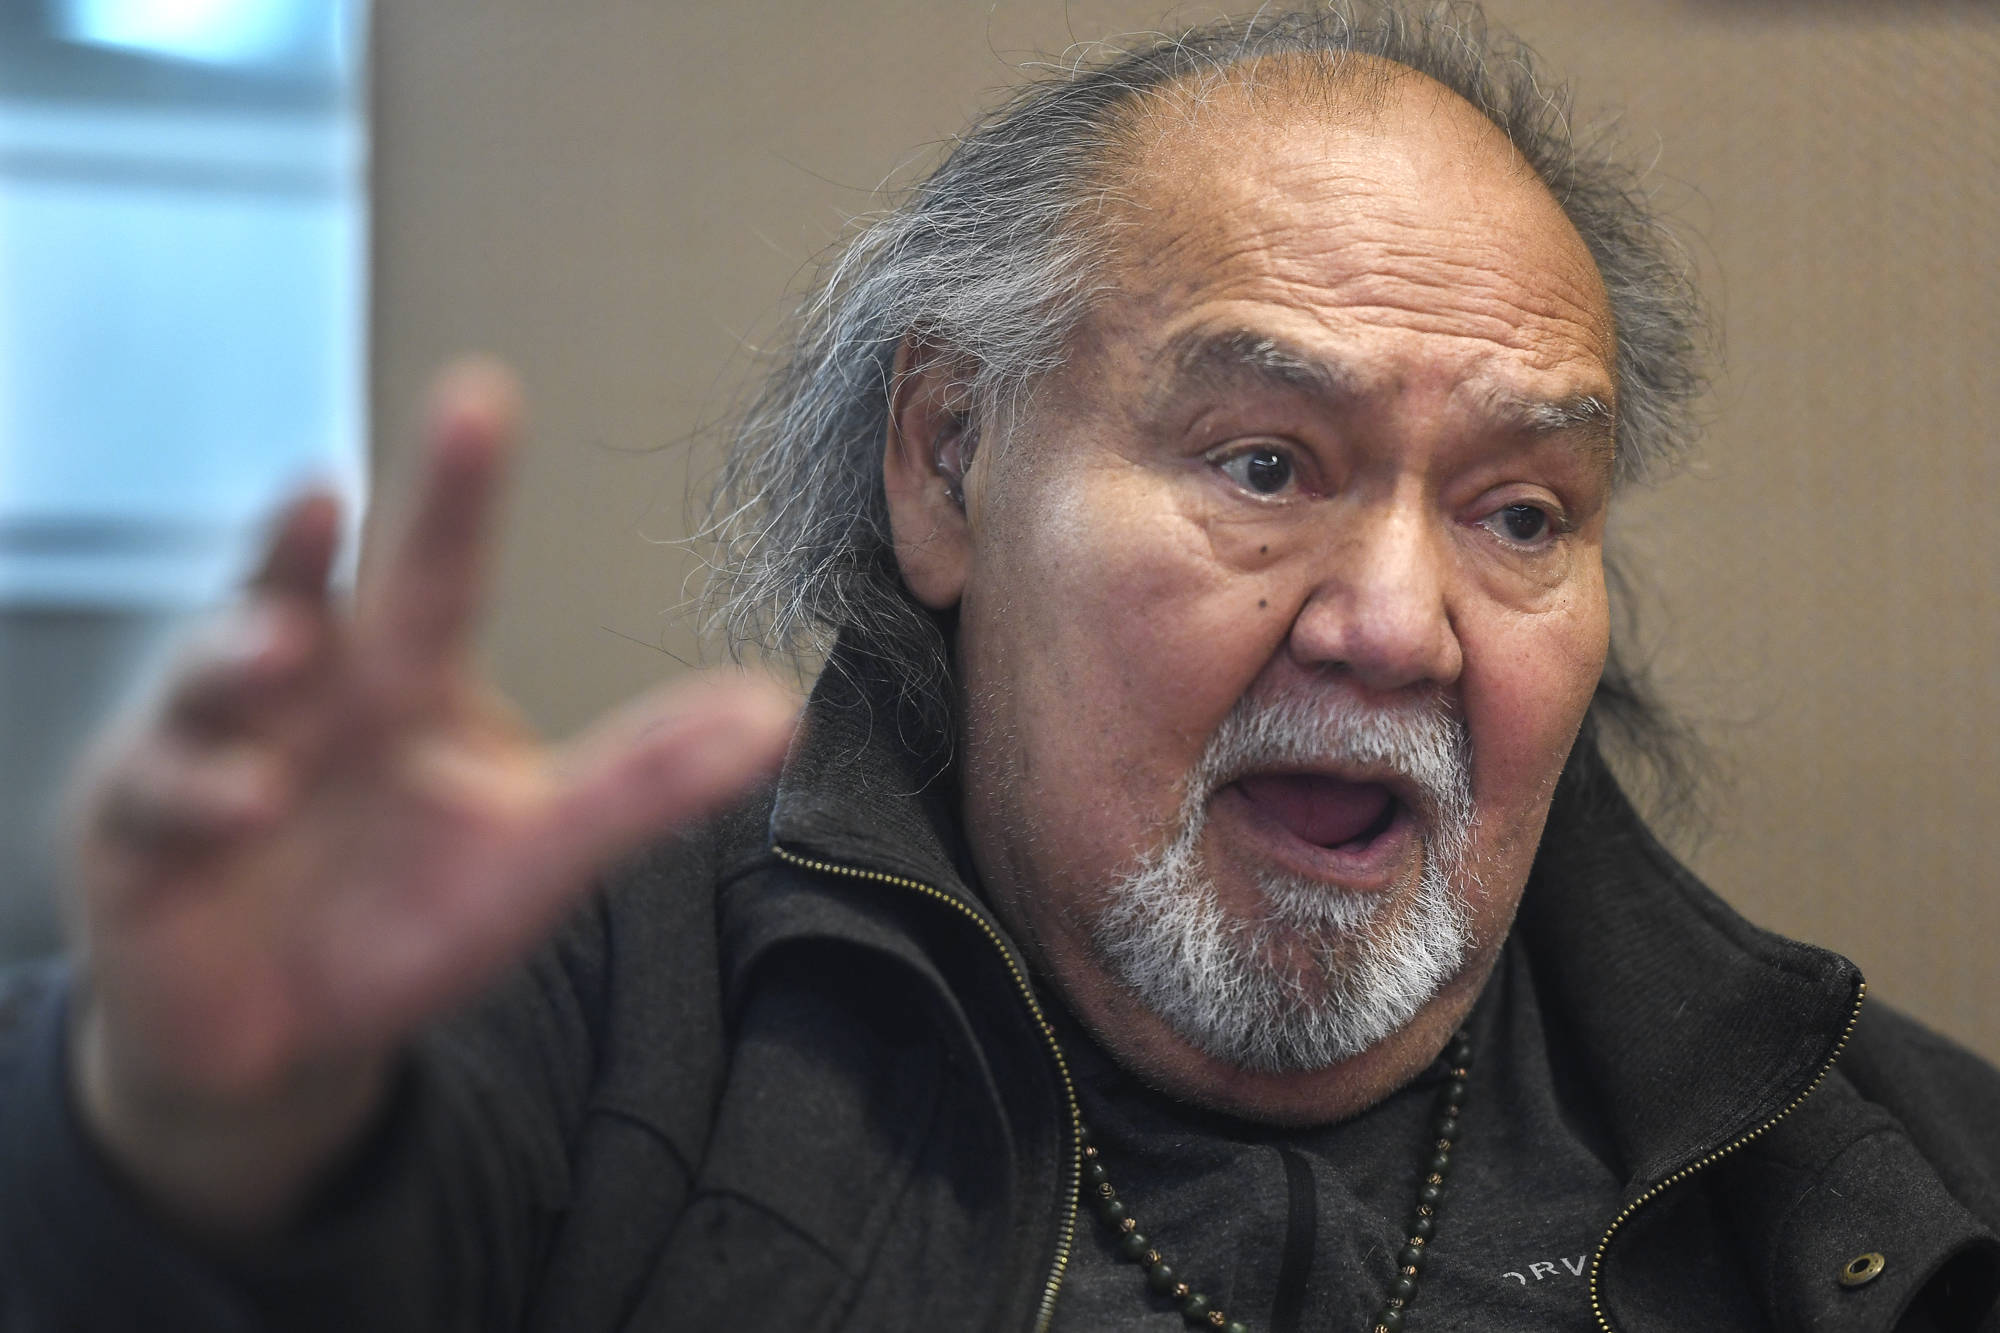 David Katzeek, leader of the Shangukeidi clan, speaks about the power of language during an interview on Wednesday, Dec. 18, 2019. (Michael Penn | Juneau Empire)